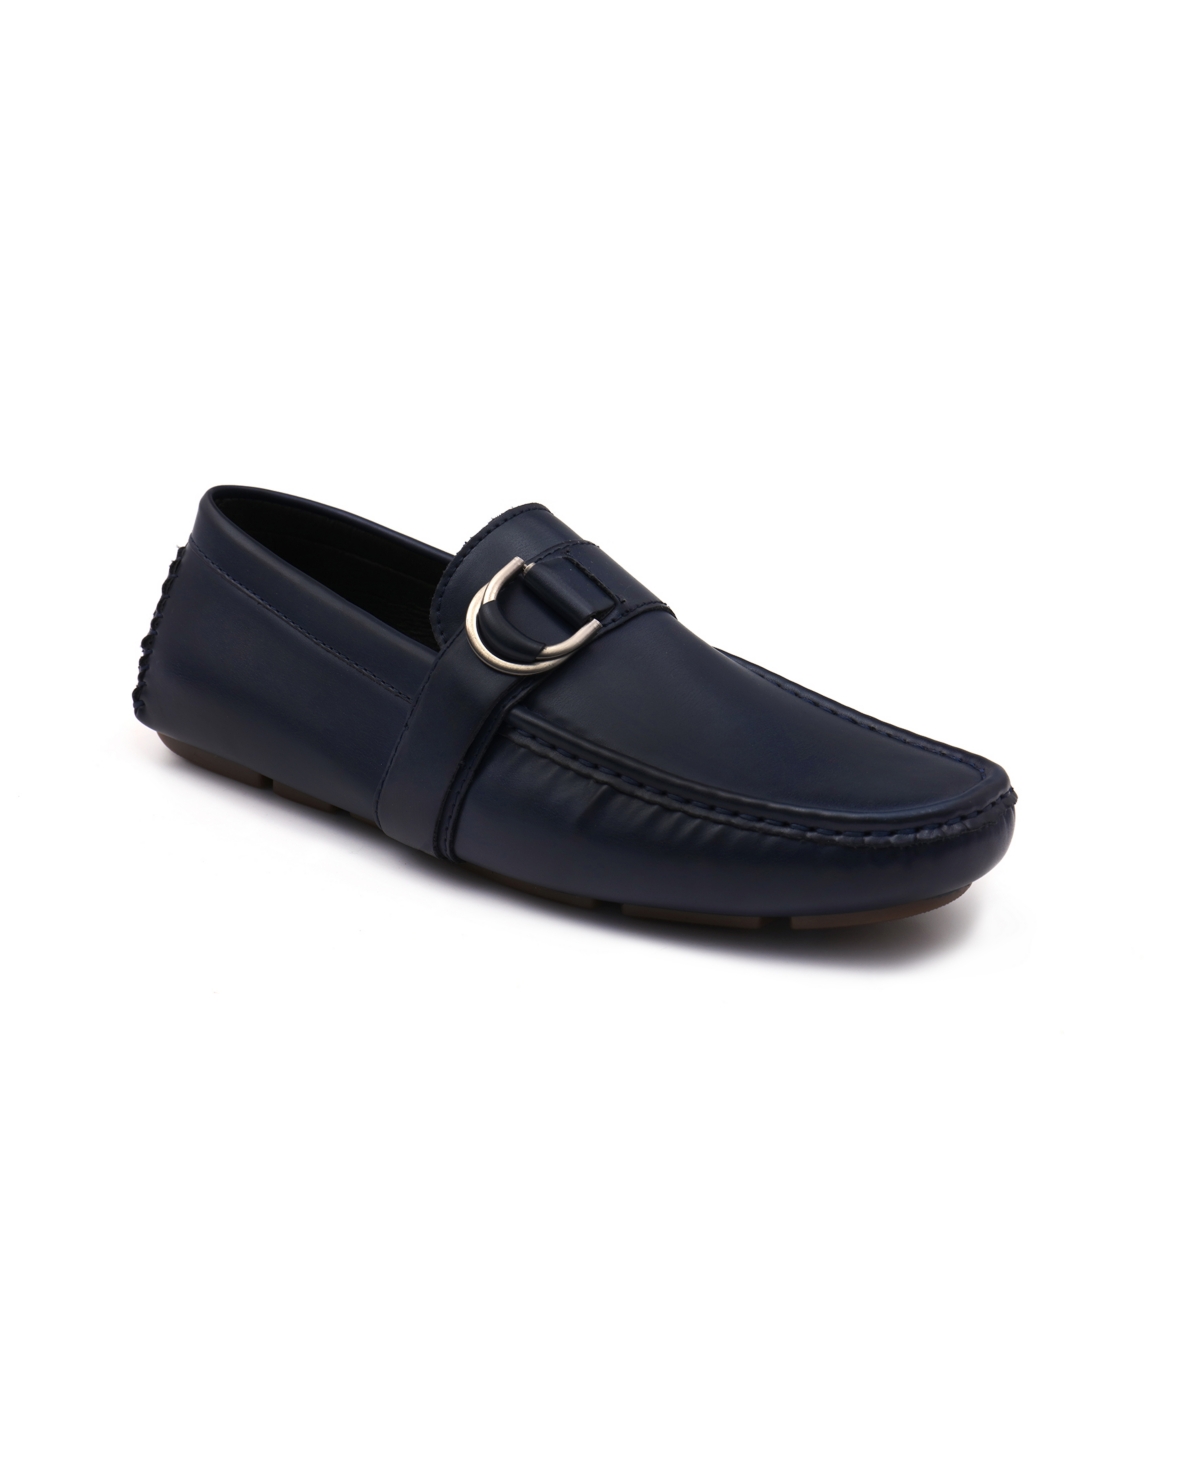 Men's Charter Side Buckle Loafers - Navy